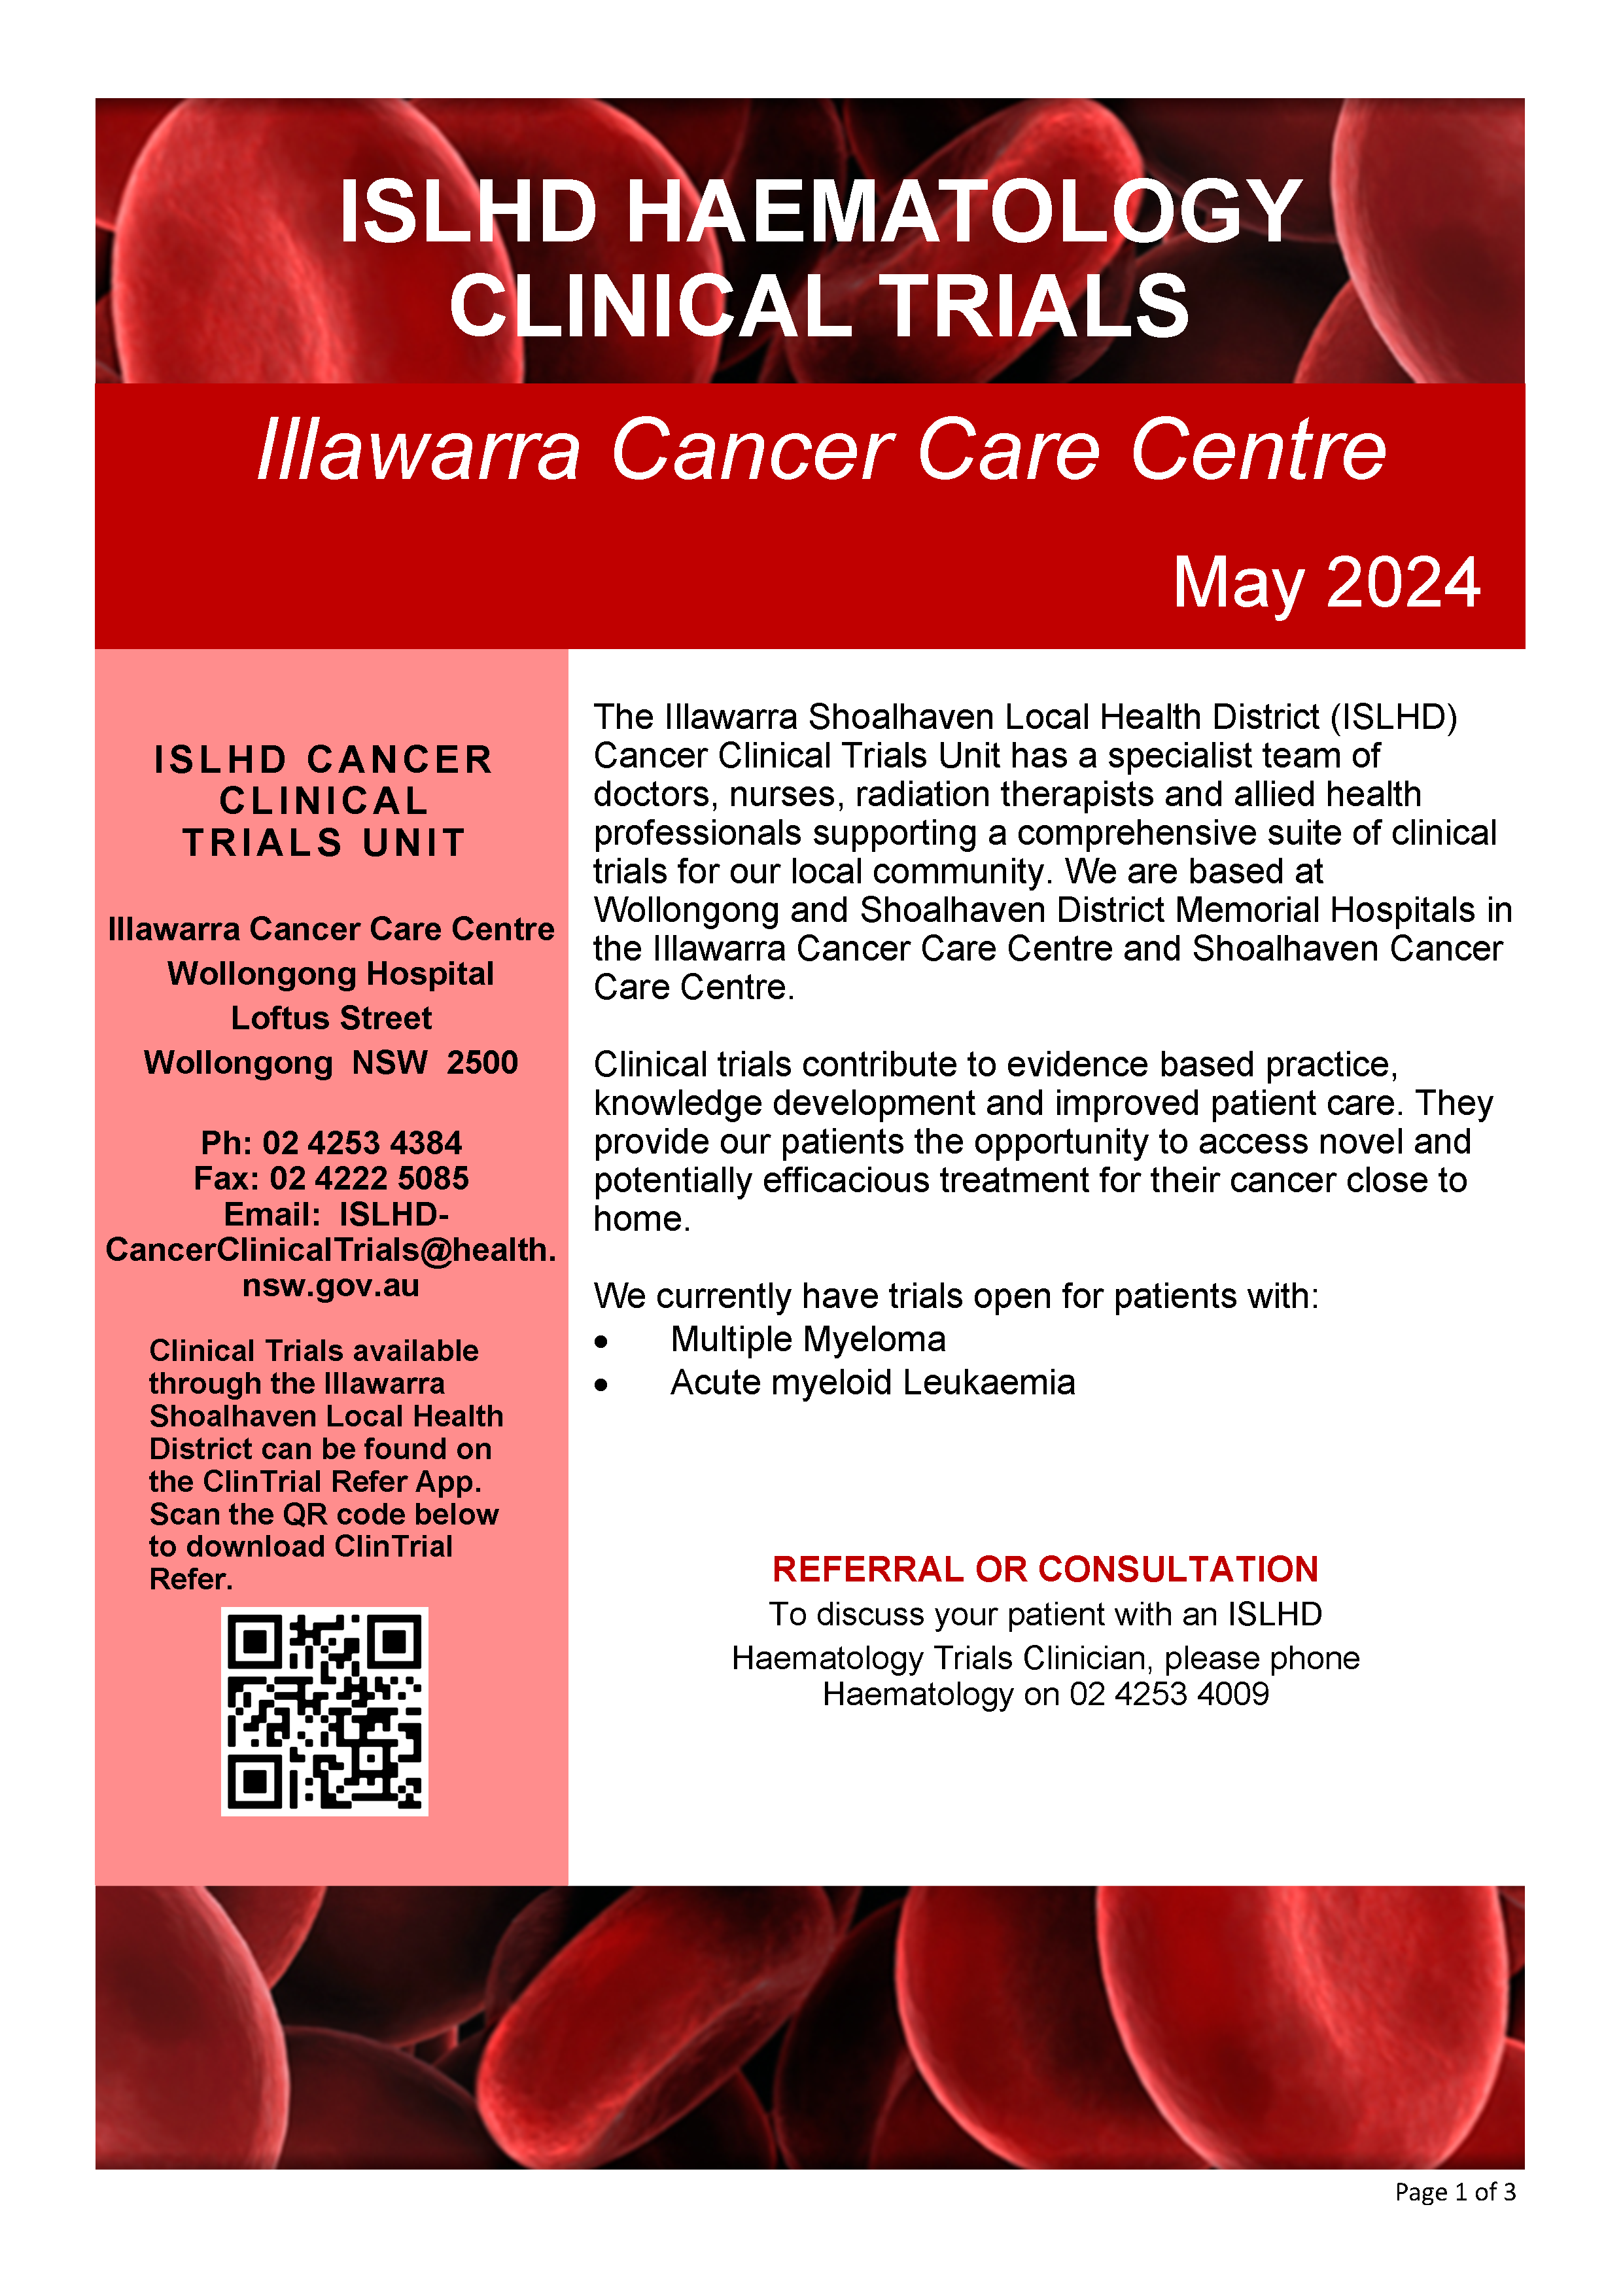 Cover of ICCC Haematology Clinical Trials newsletter